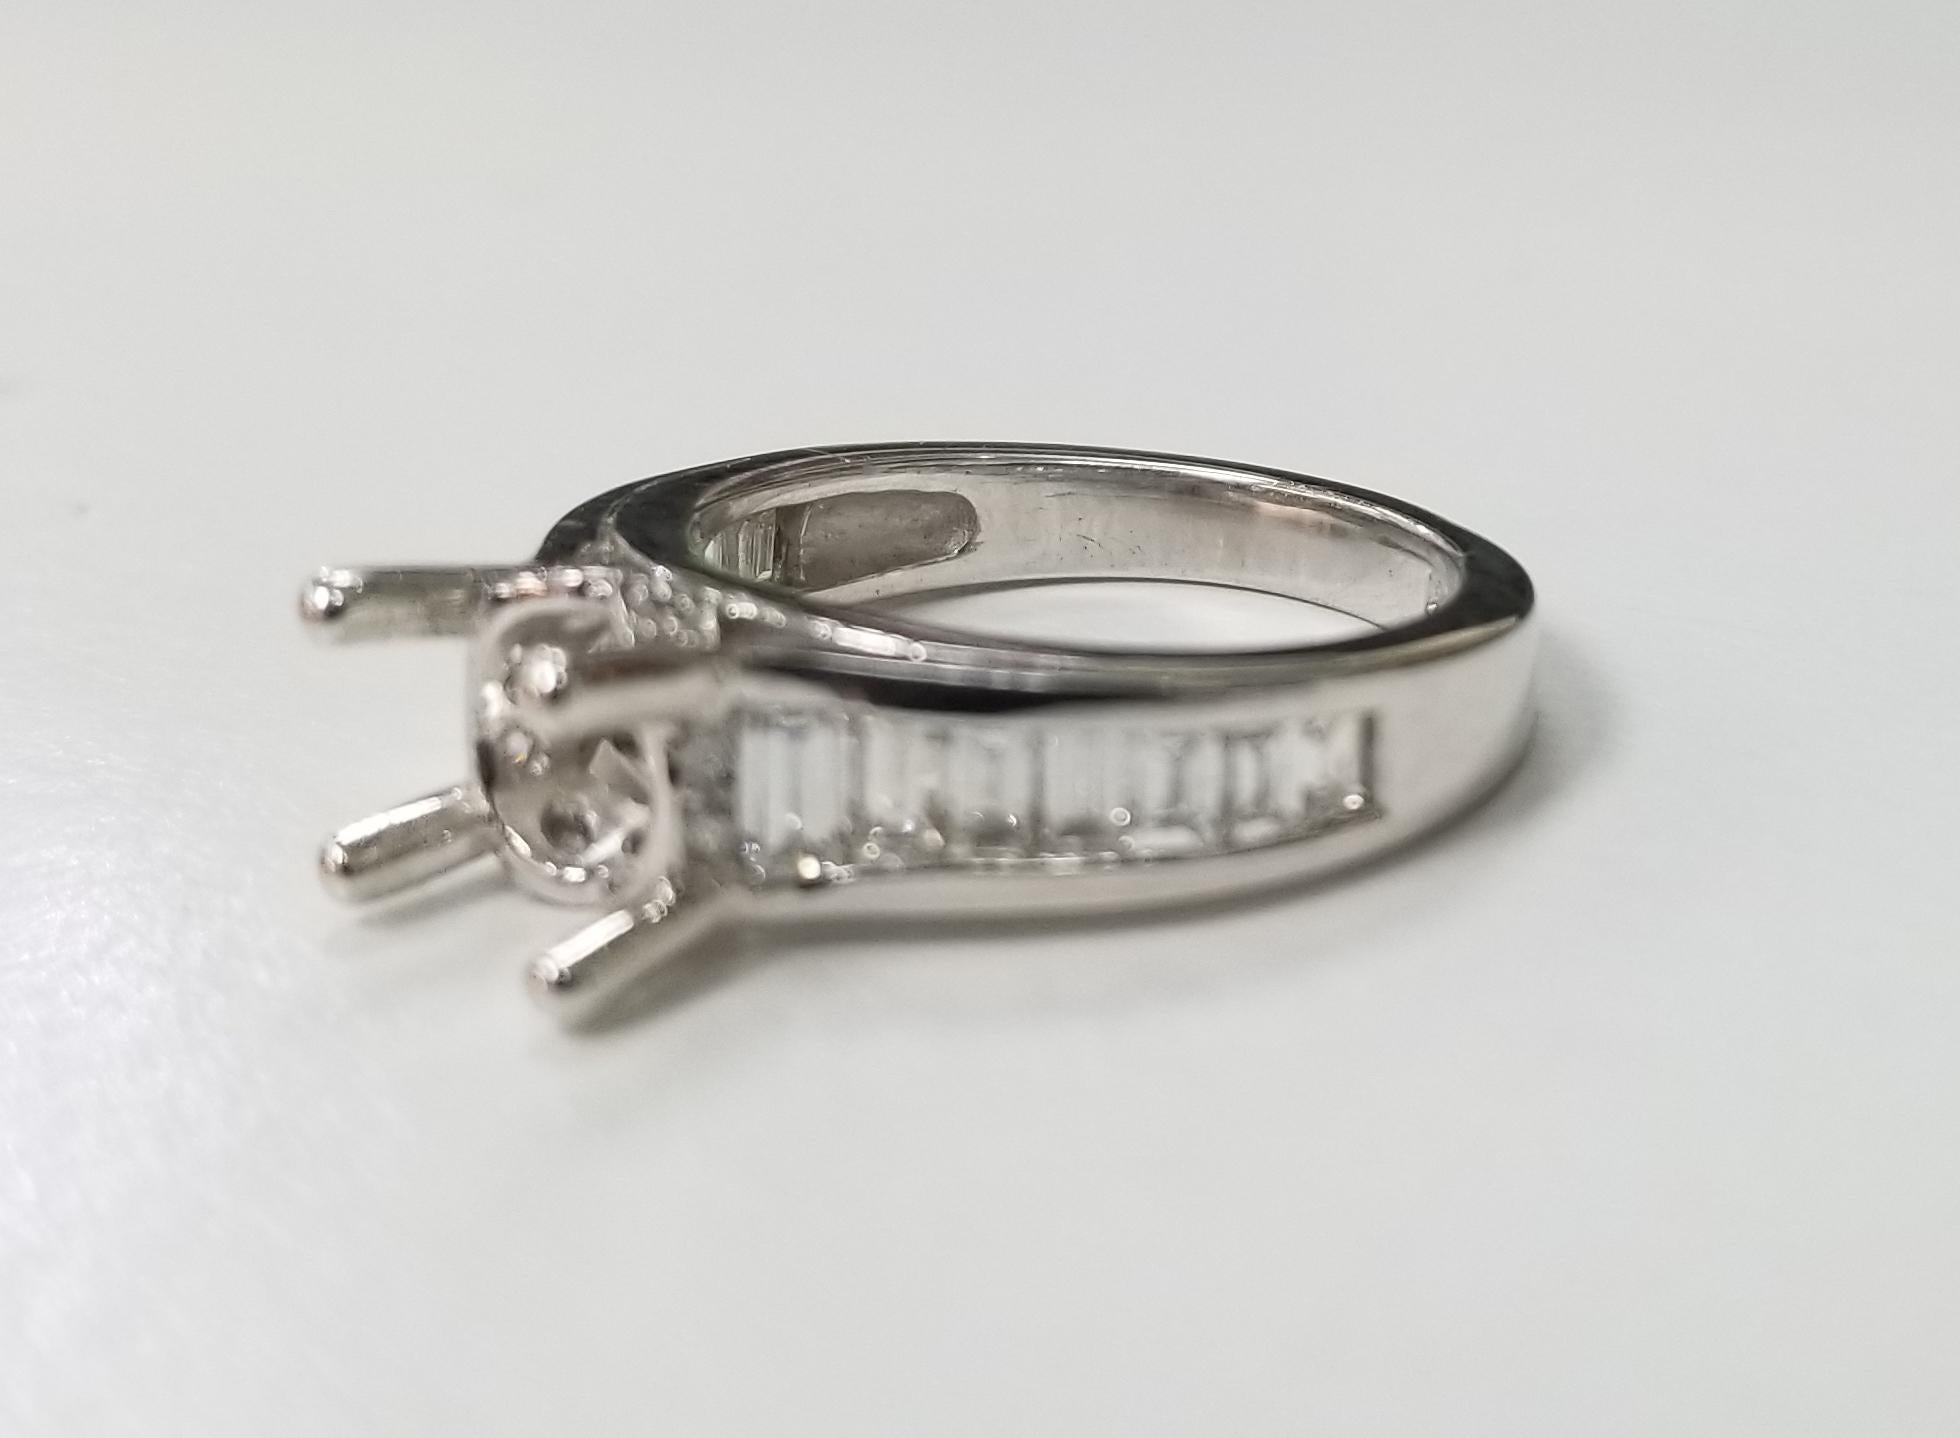 14k white gold baguette and round ascent diamond ring, containing 14 baguette cut diamonds weighing 1.00ct. and 10 round full cut diamonds weighing .11pts., color 